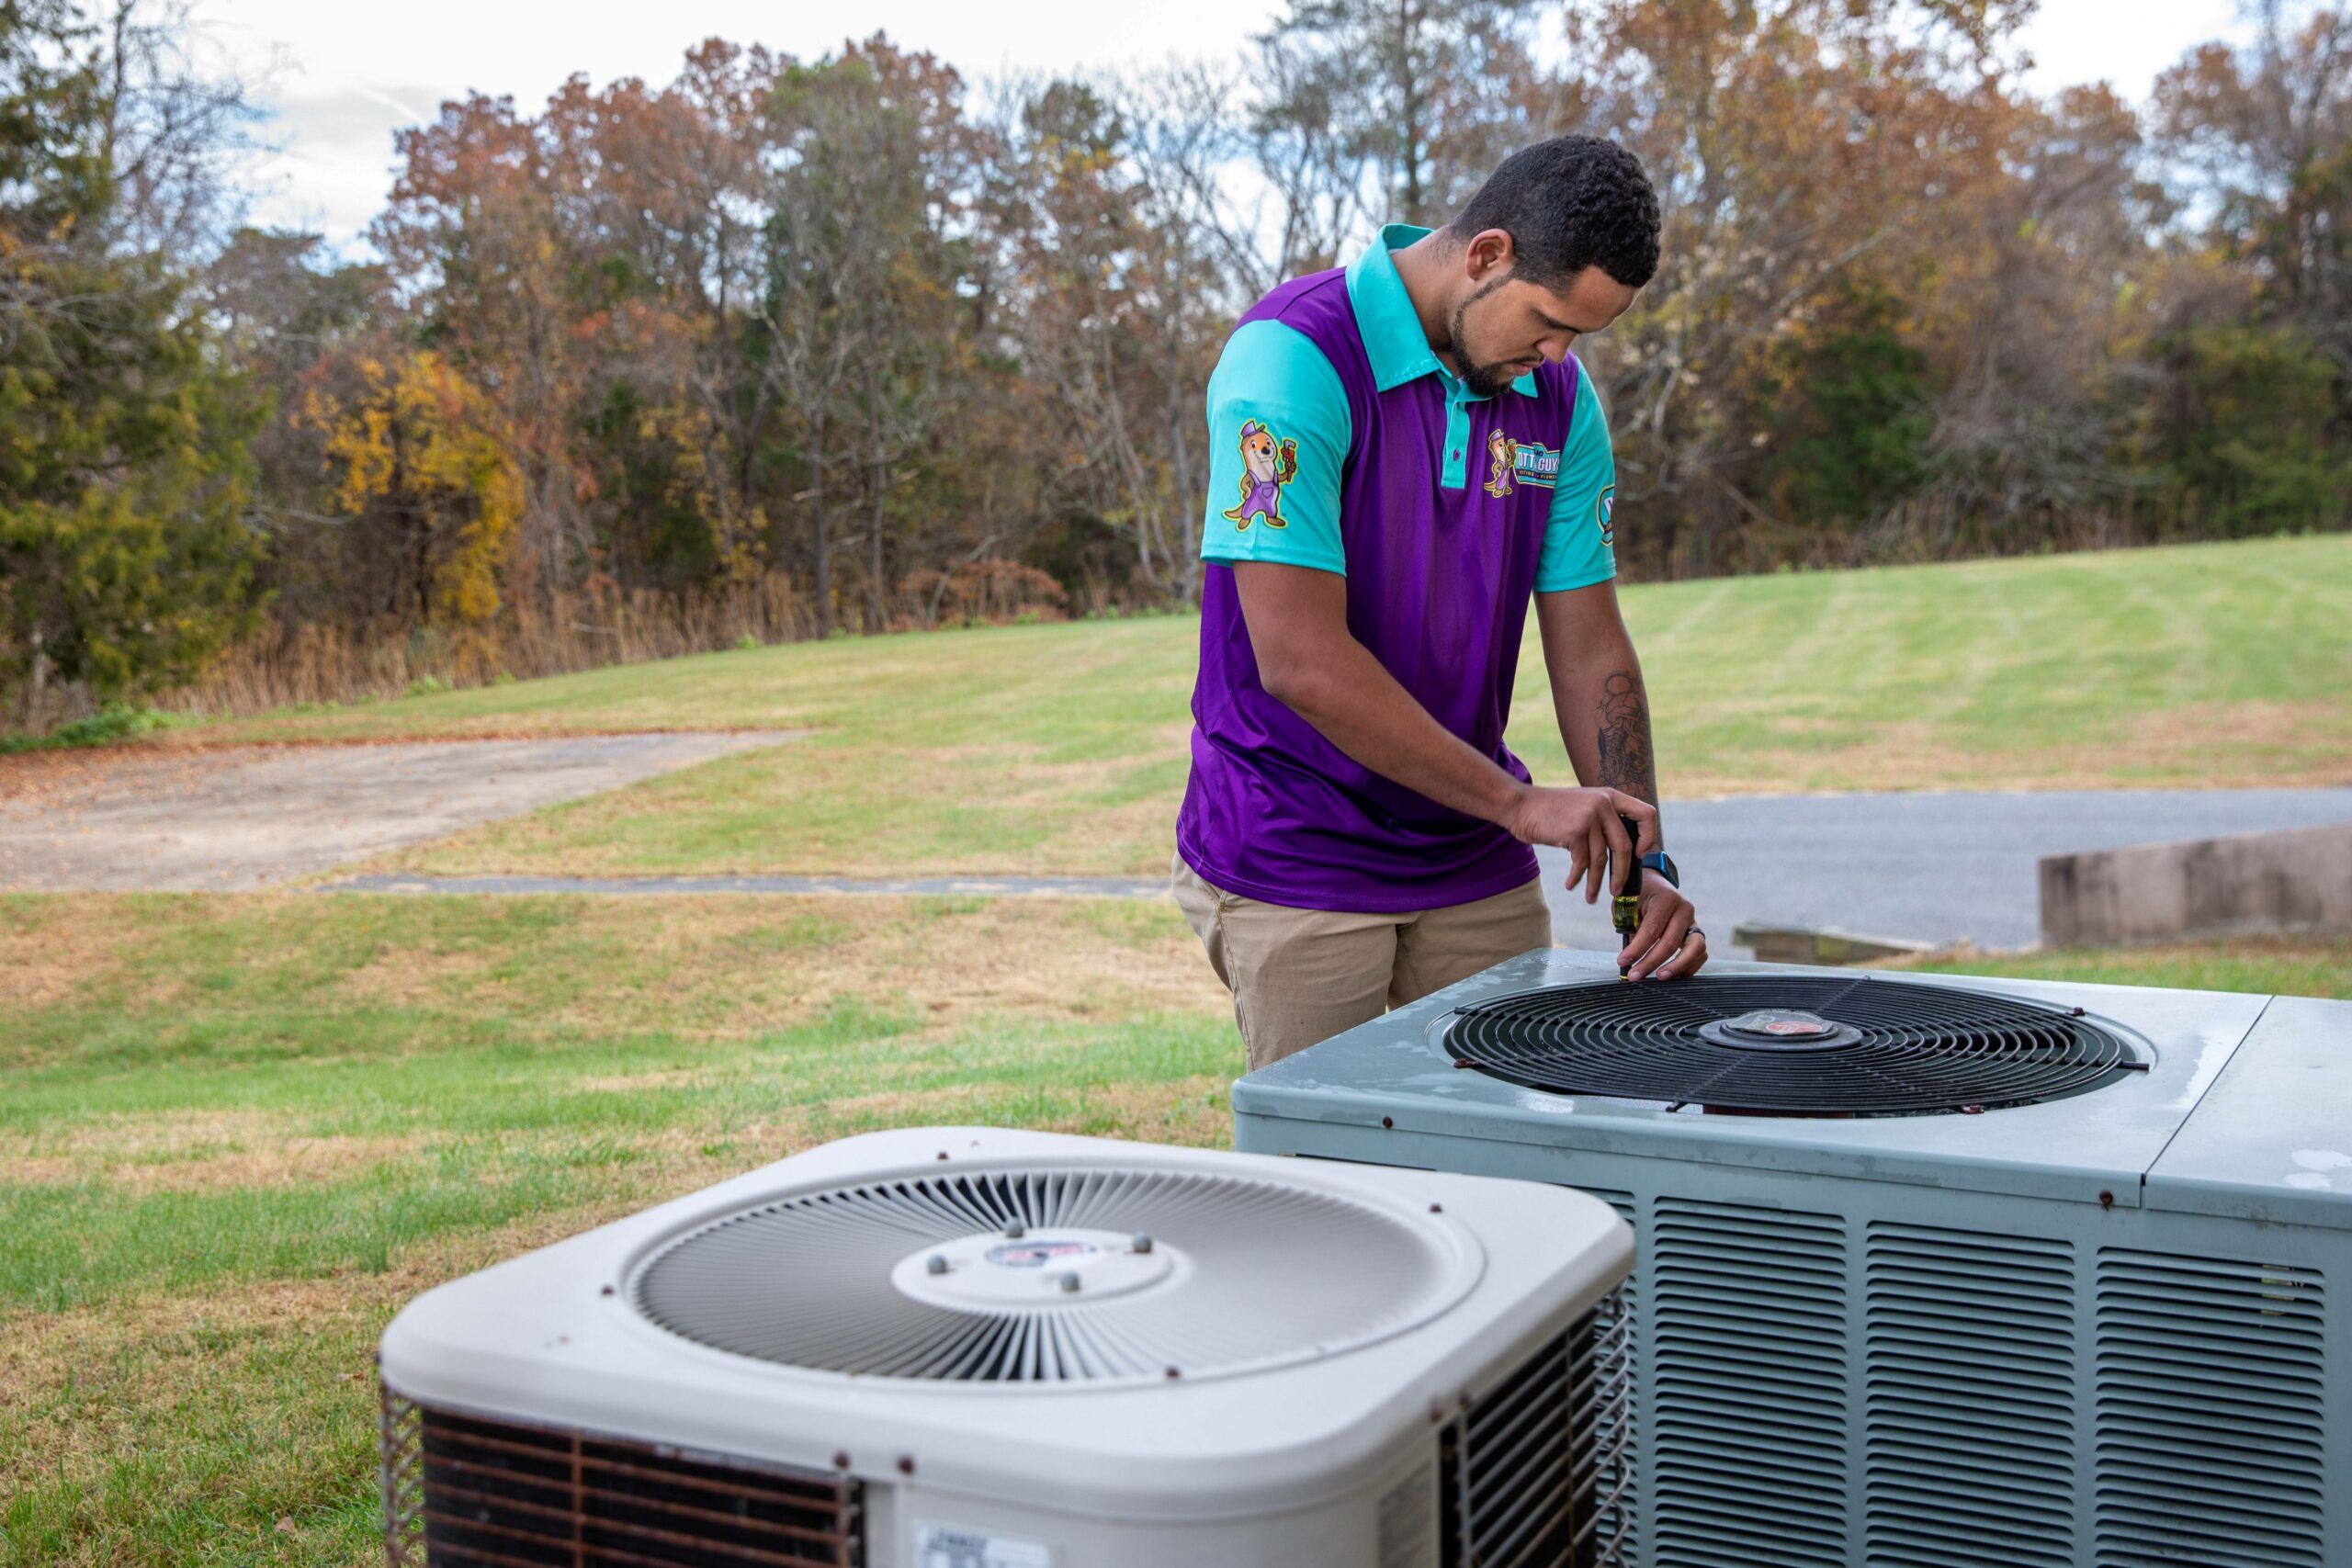 An HVAC technician evaluating an Air Conditioning unit sitting outside on the grass.